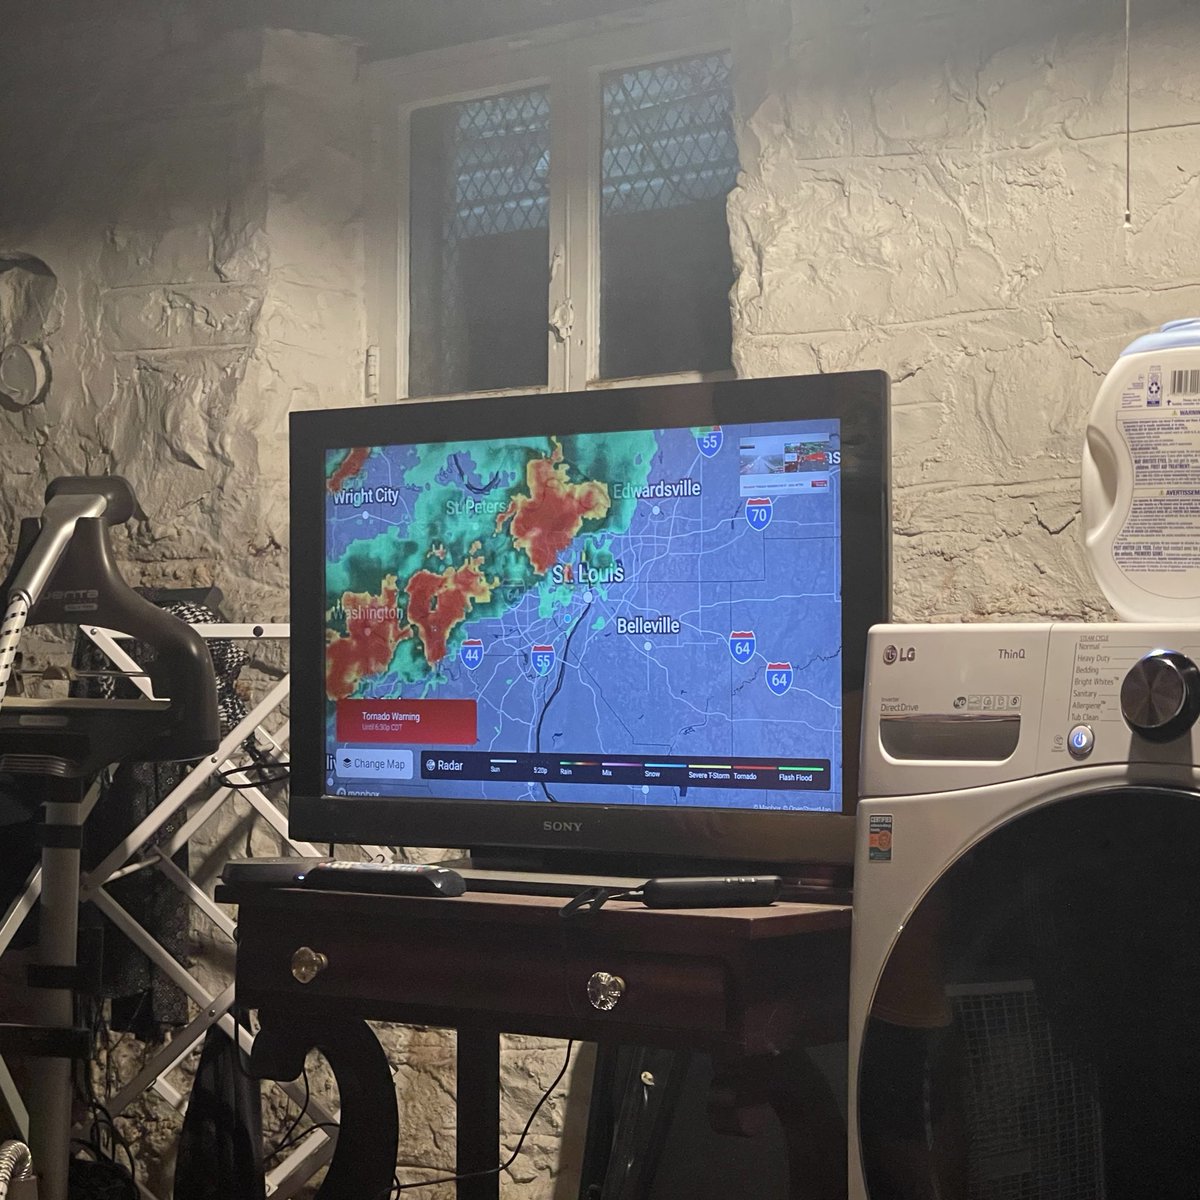 Does your #midwest basement feature a special severe storm tv? #Stlwx